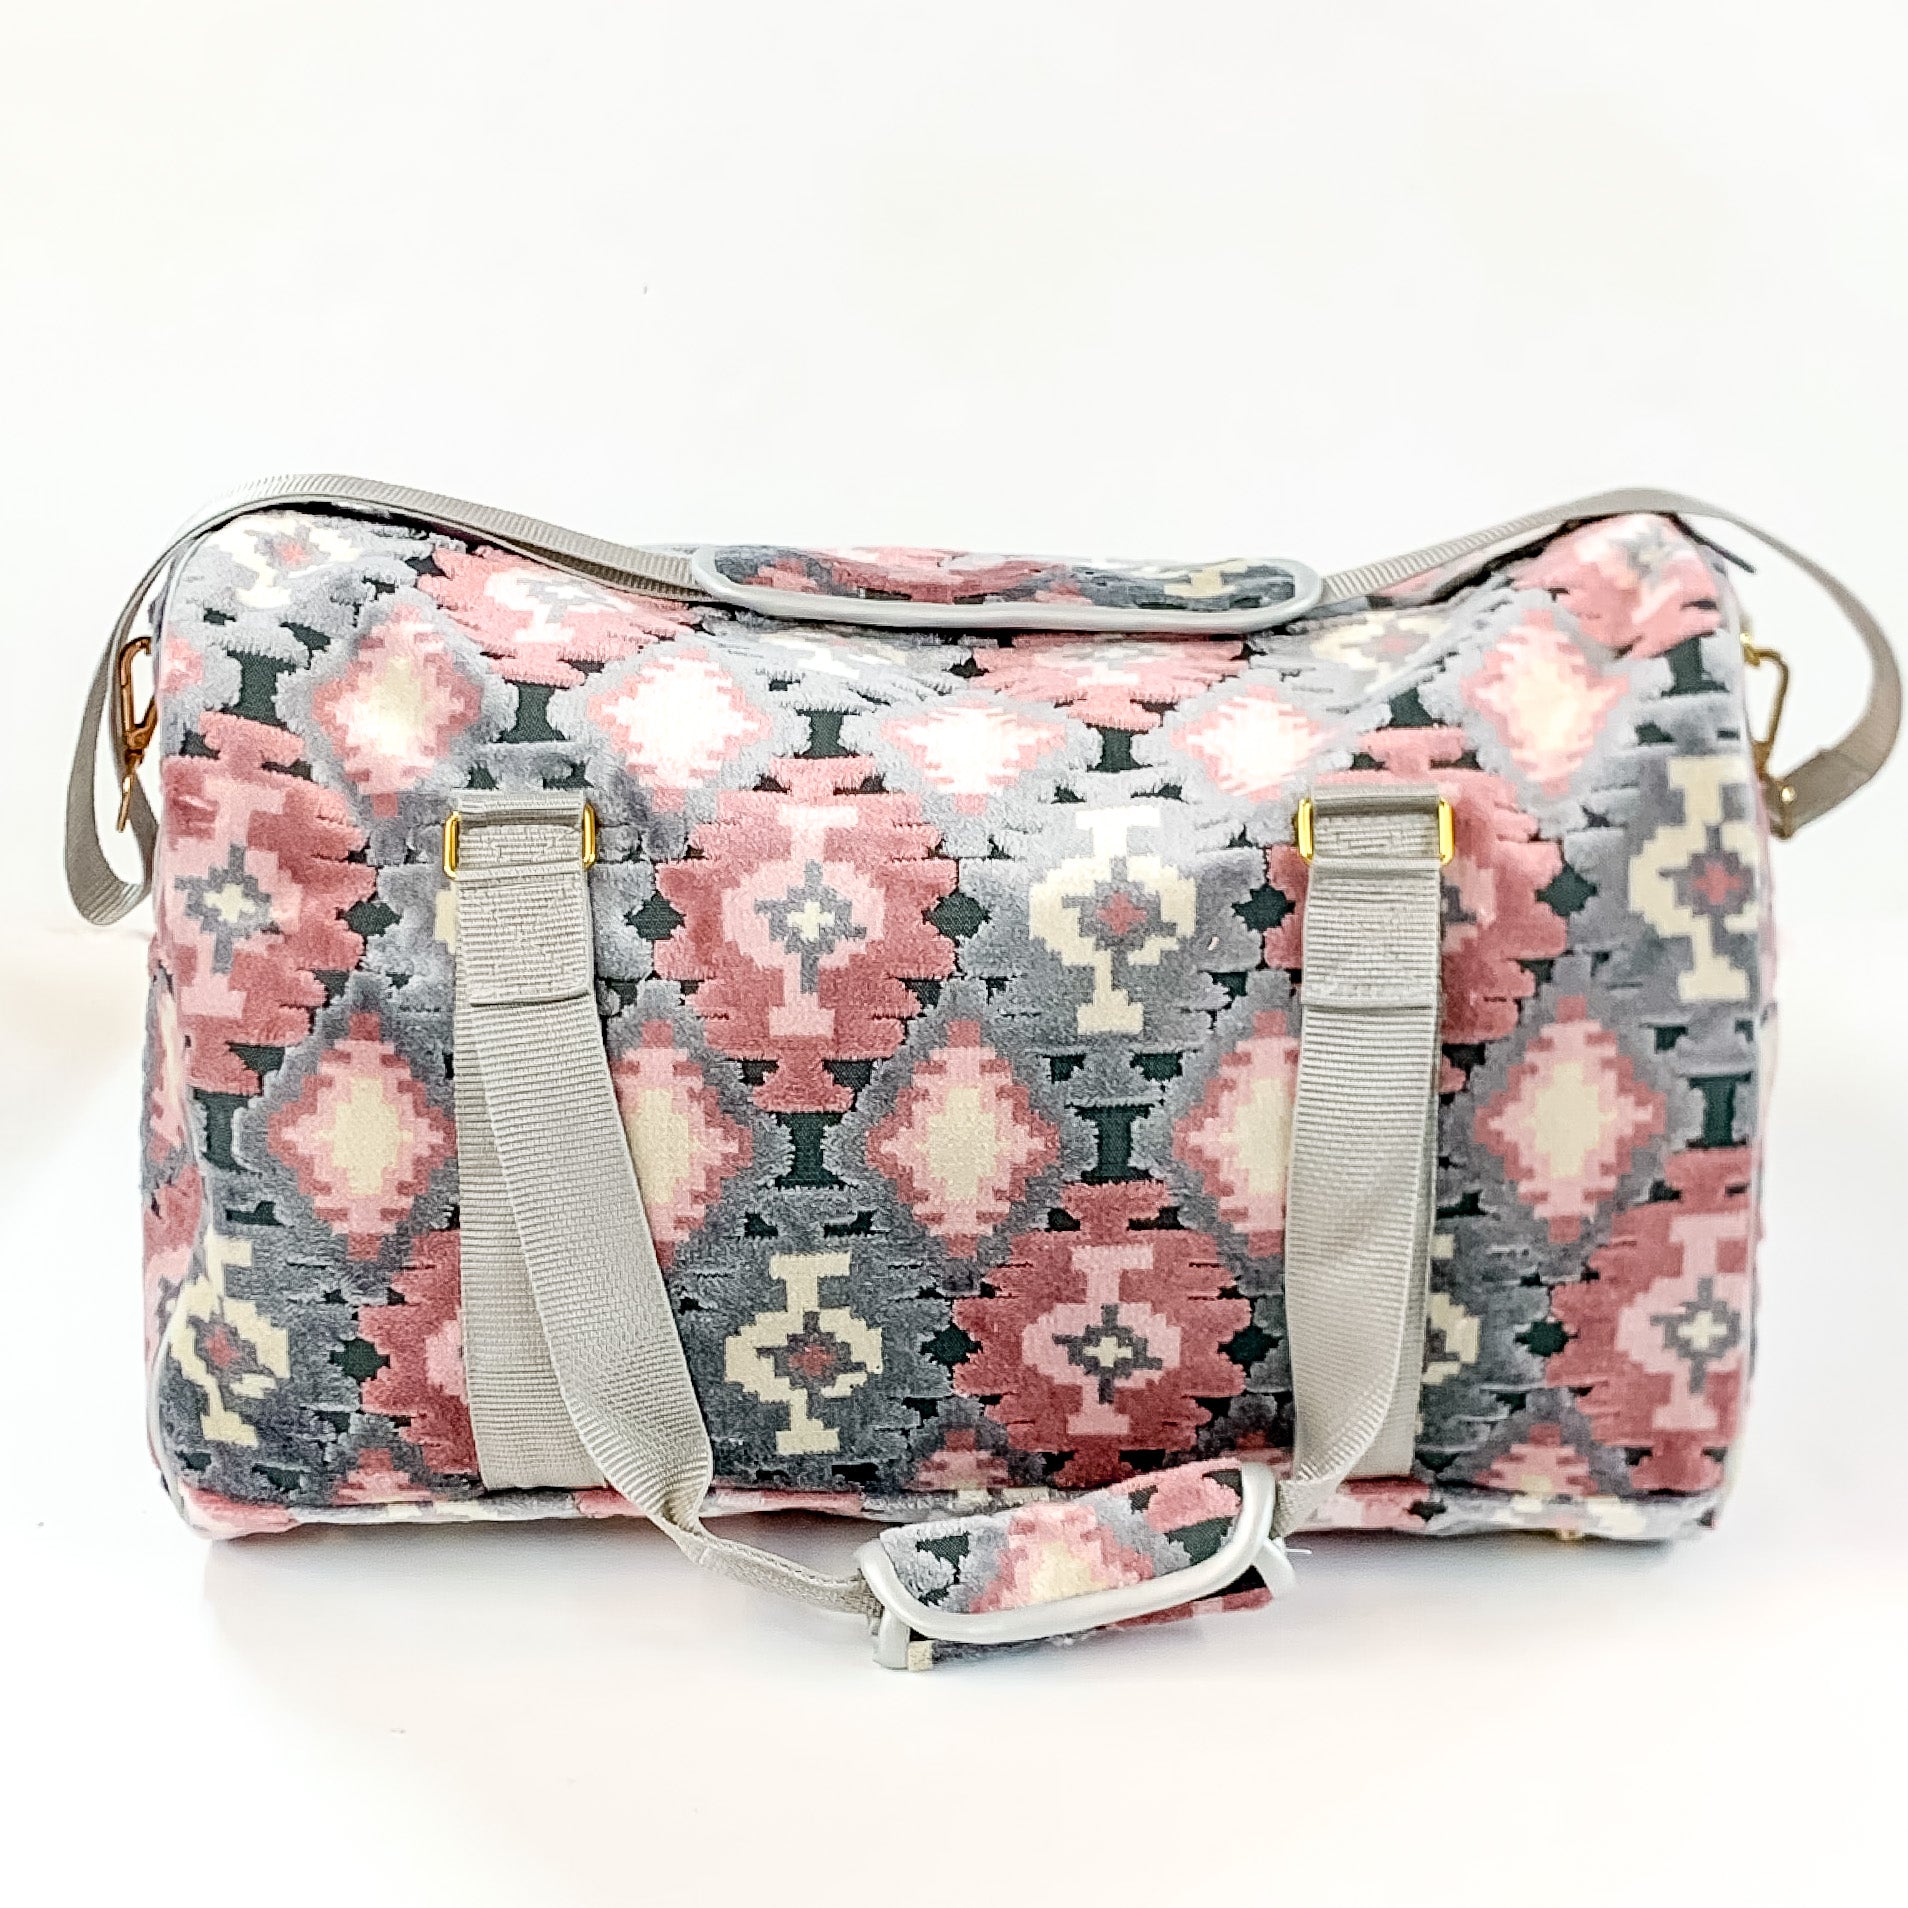 Makeup Junkie | Blush Aztec Duffel Bag in Blush Pink and Grey Mix - Giddy Up Glamour Boutique